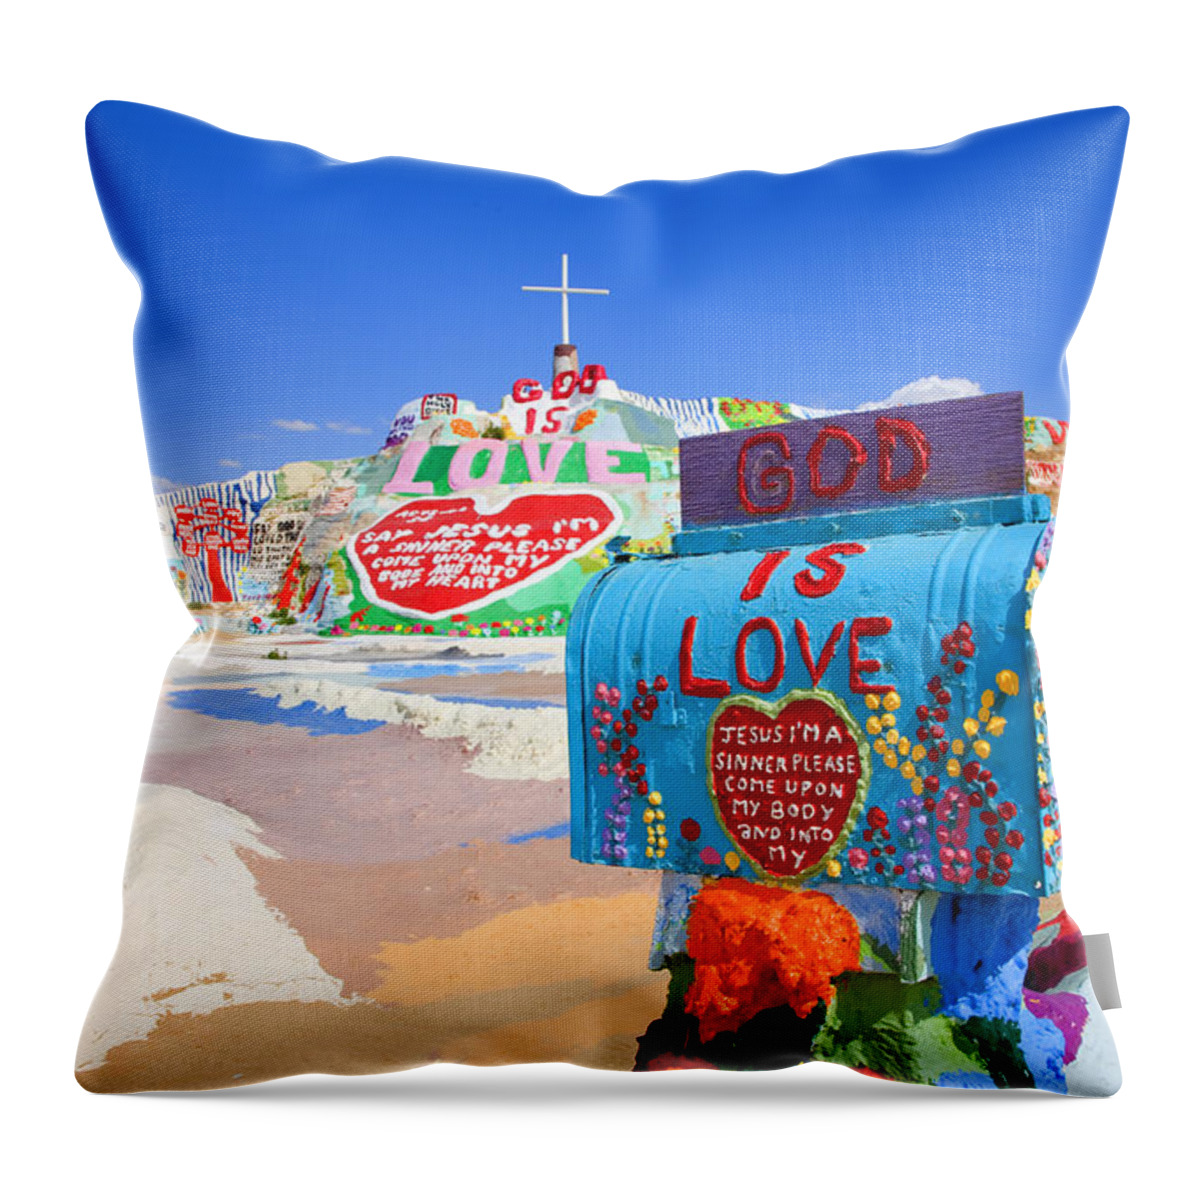 God Id Love Throw Pillow featuring the photograph God's Mailbox by Hugh Smith